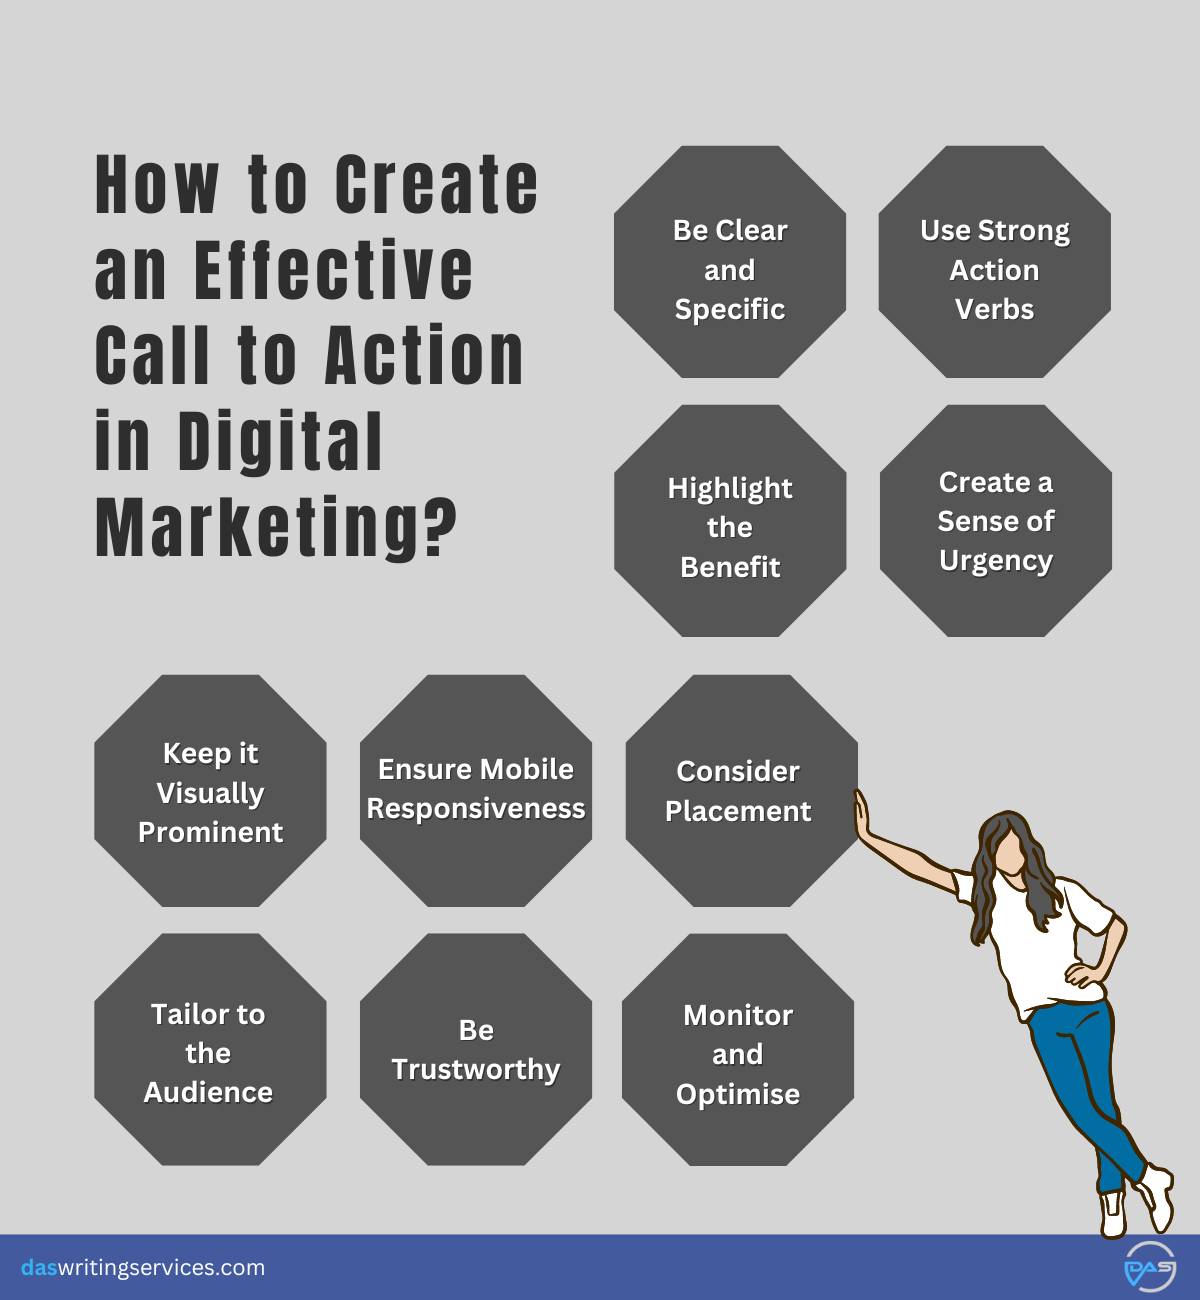 How to Create an Effective Call to Action in Digital Marketing?